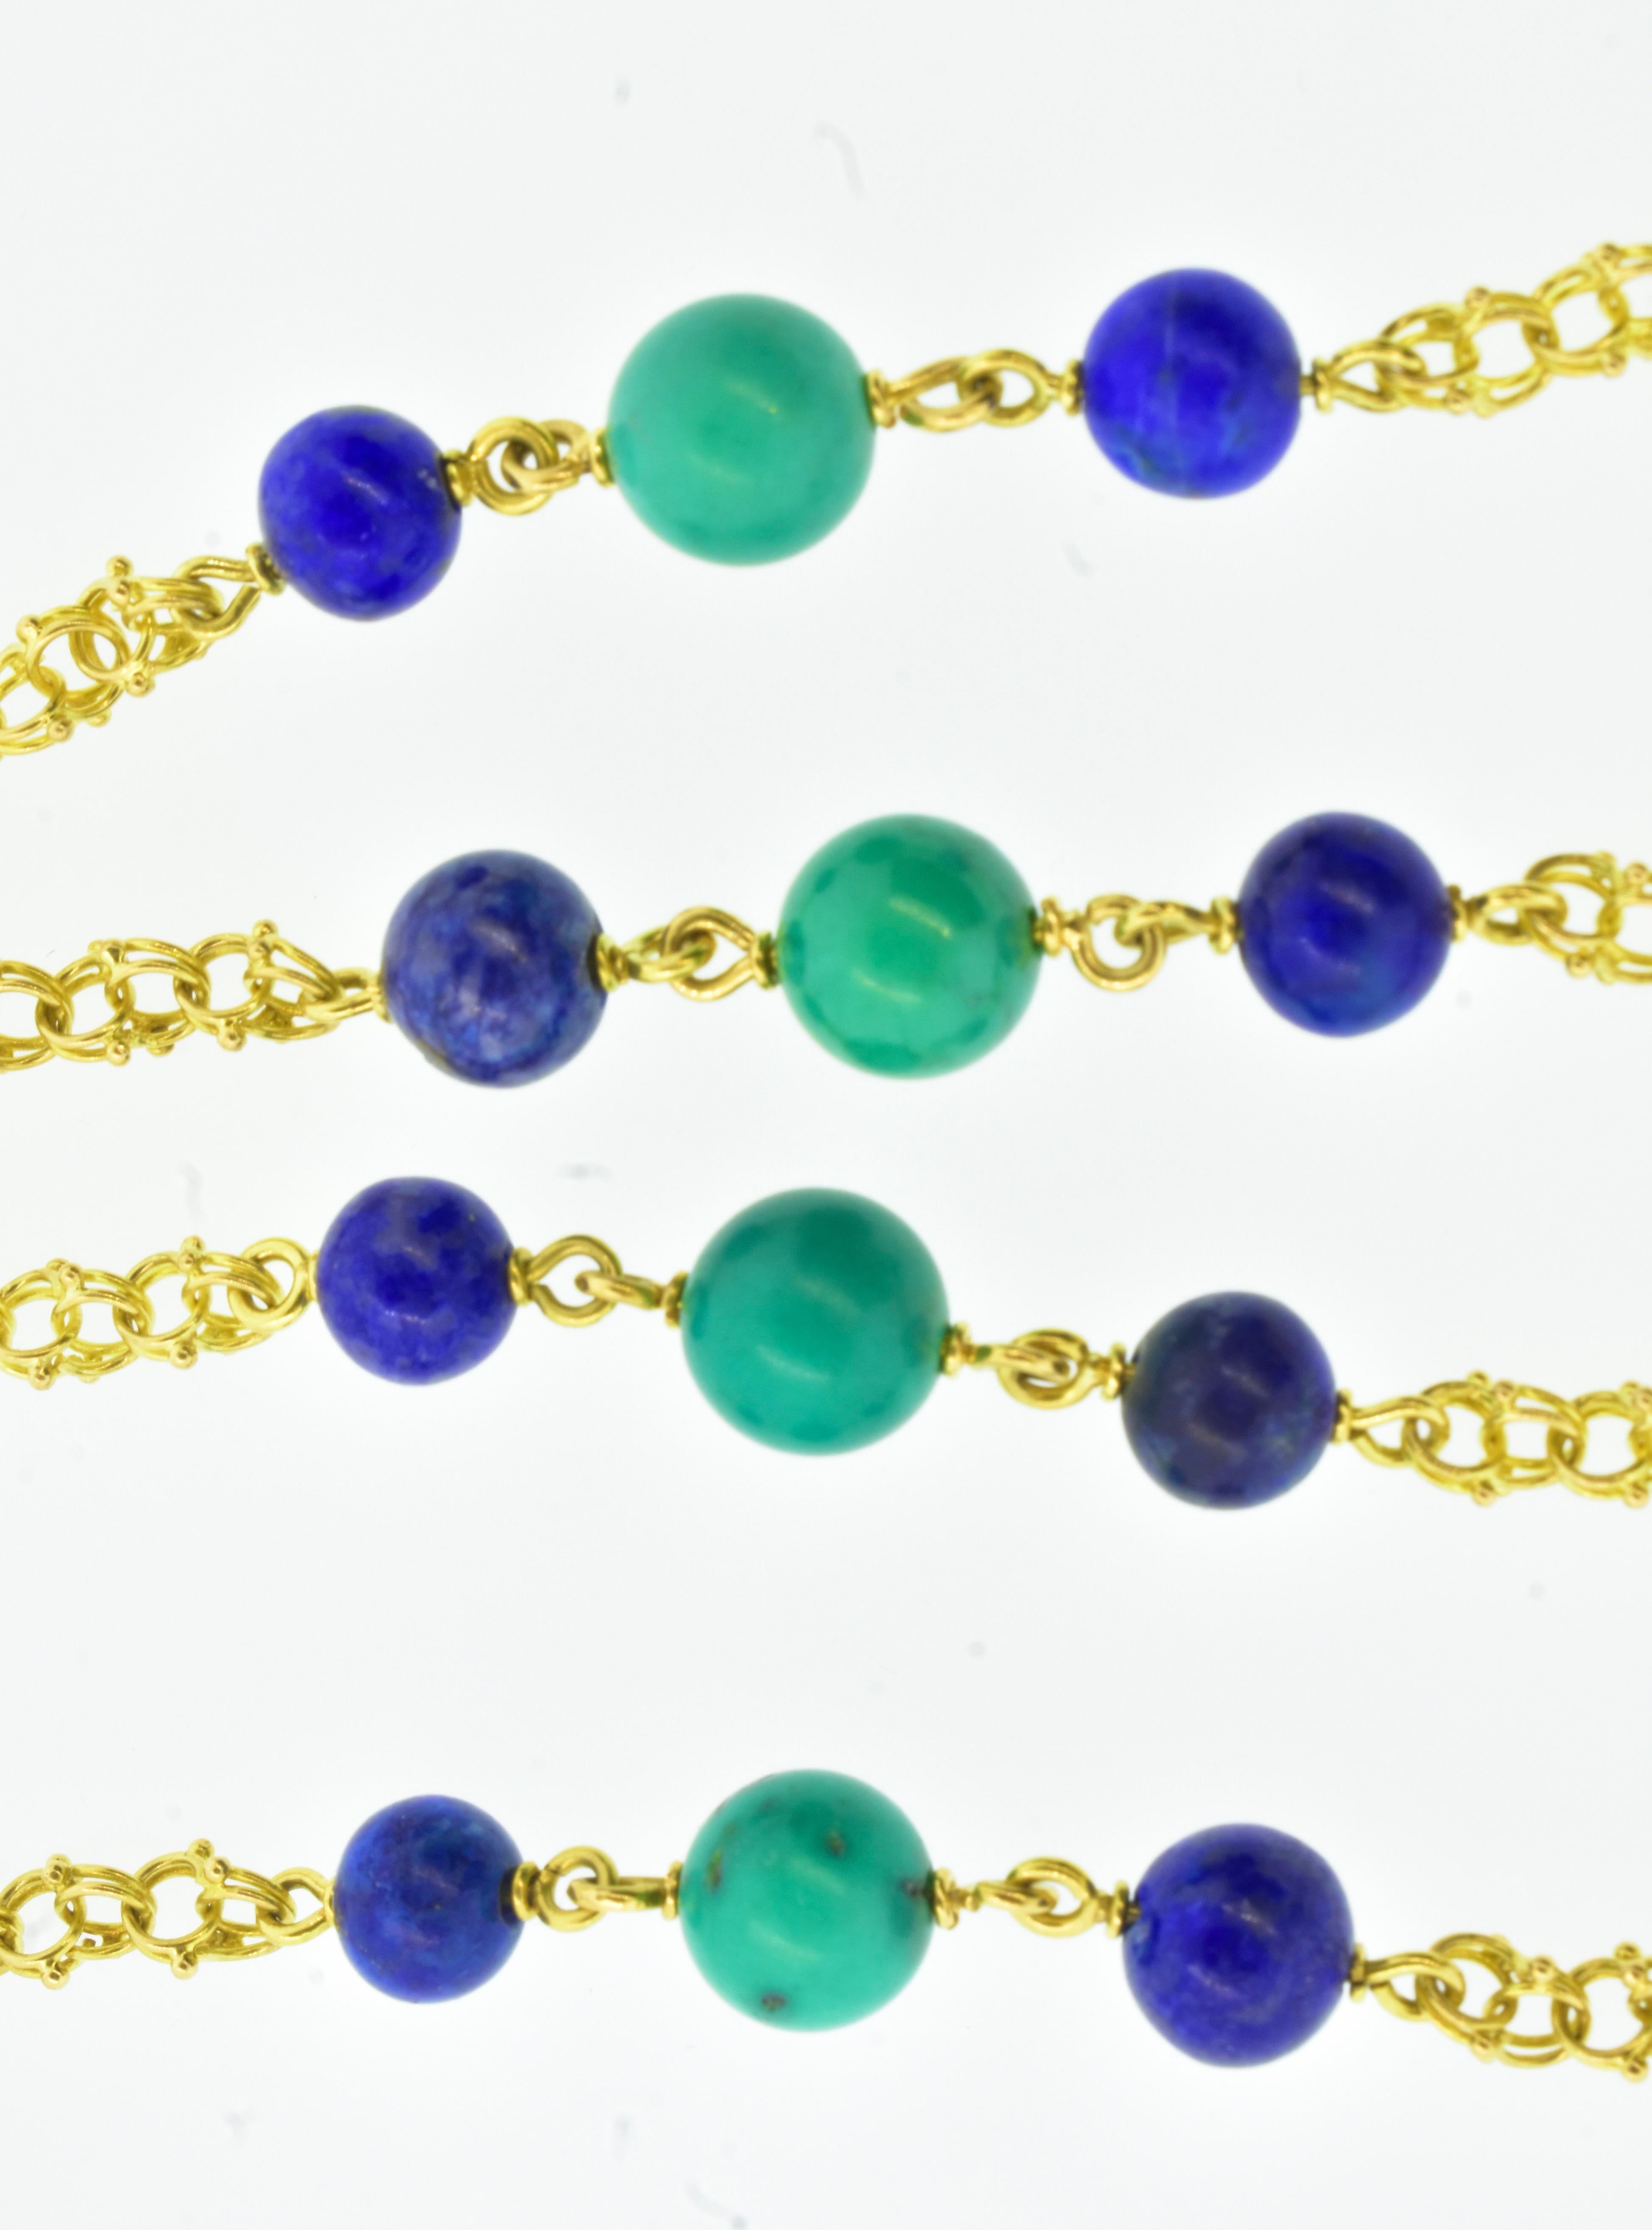 Women's or Men's Vintage Long Gold Chain interspersed with Lapis and Turquoise, c. 1960